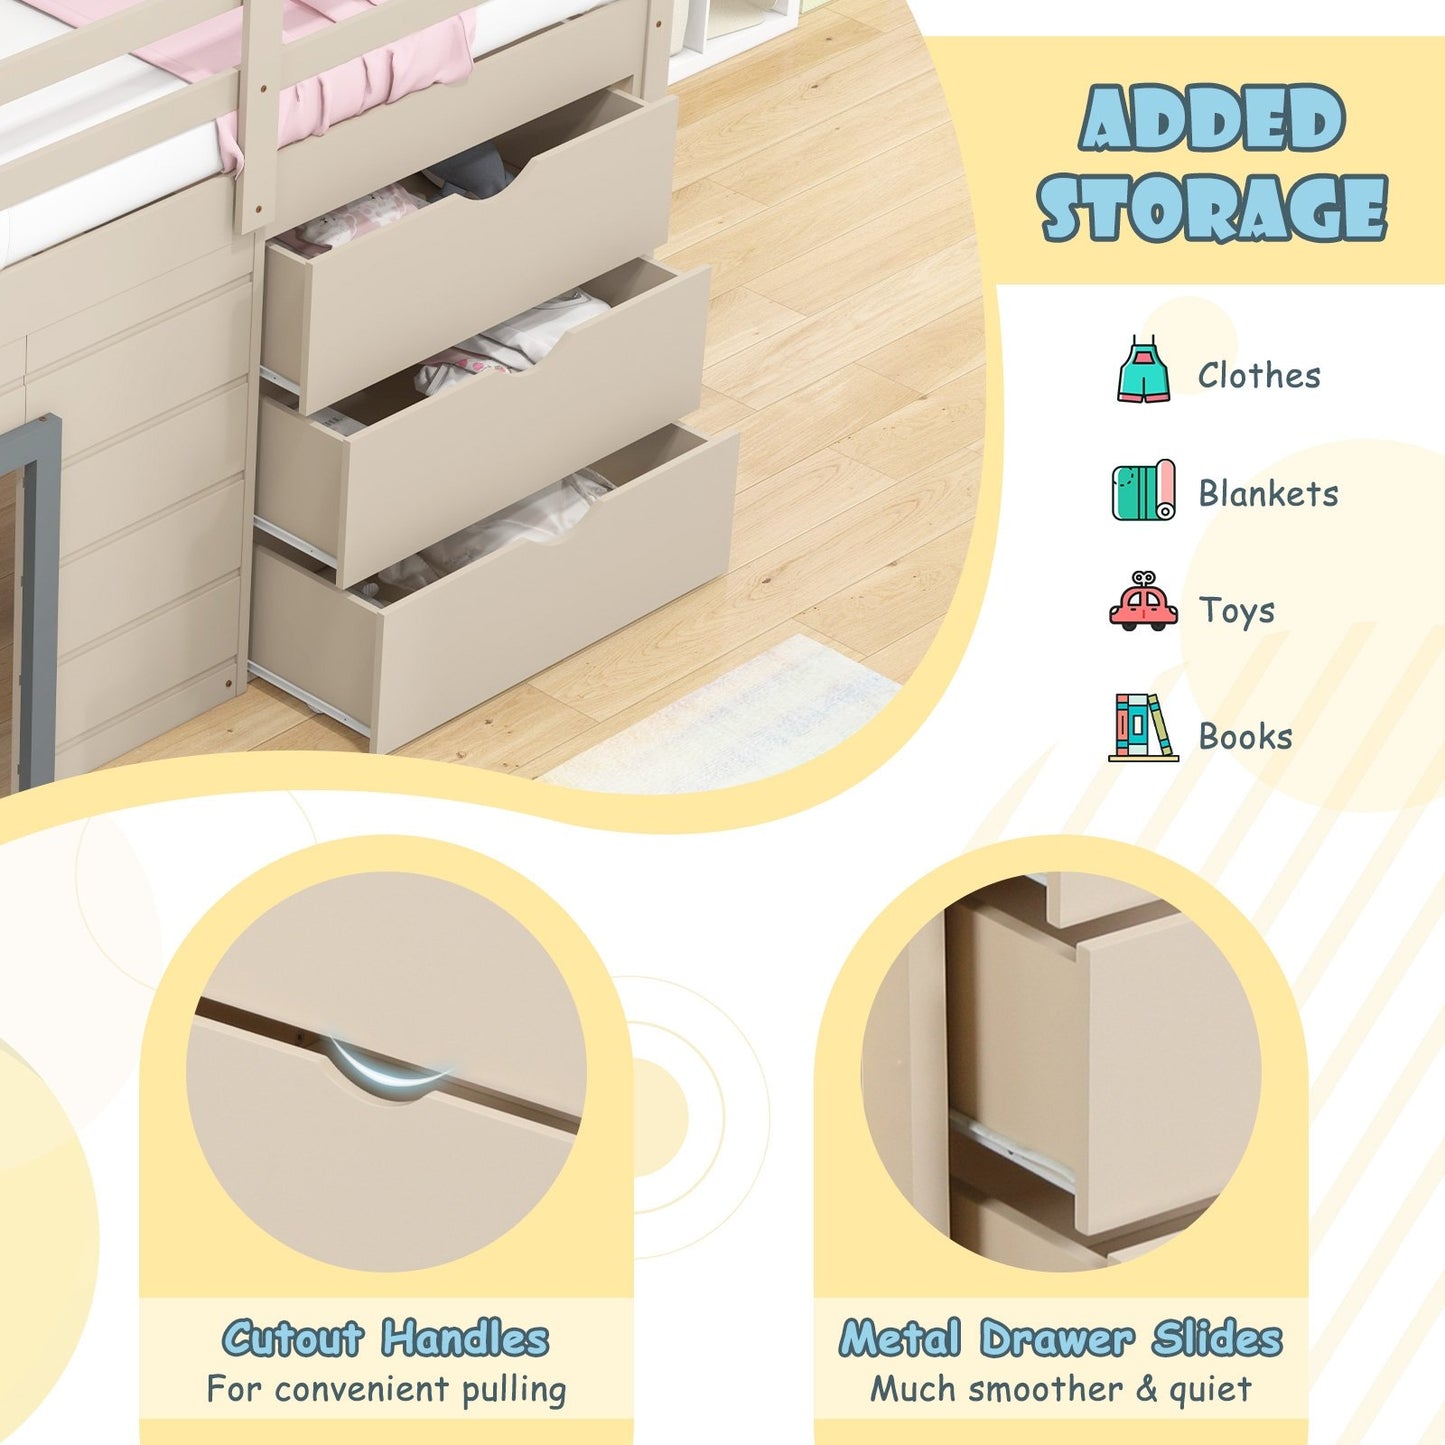 3-In-1 Twin Loft Bed with Slide Ladder Drawers for Kids Teens, Beige